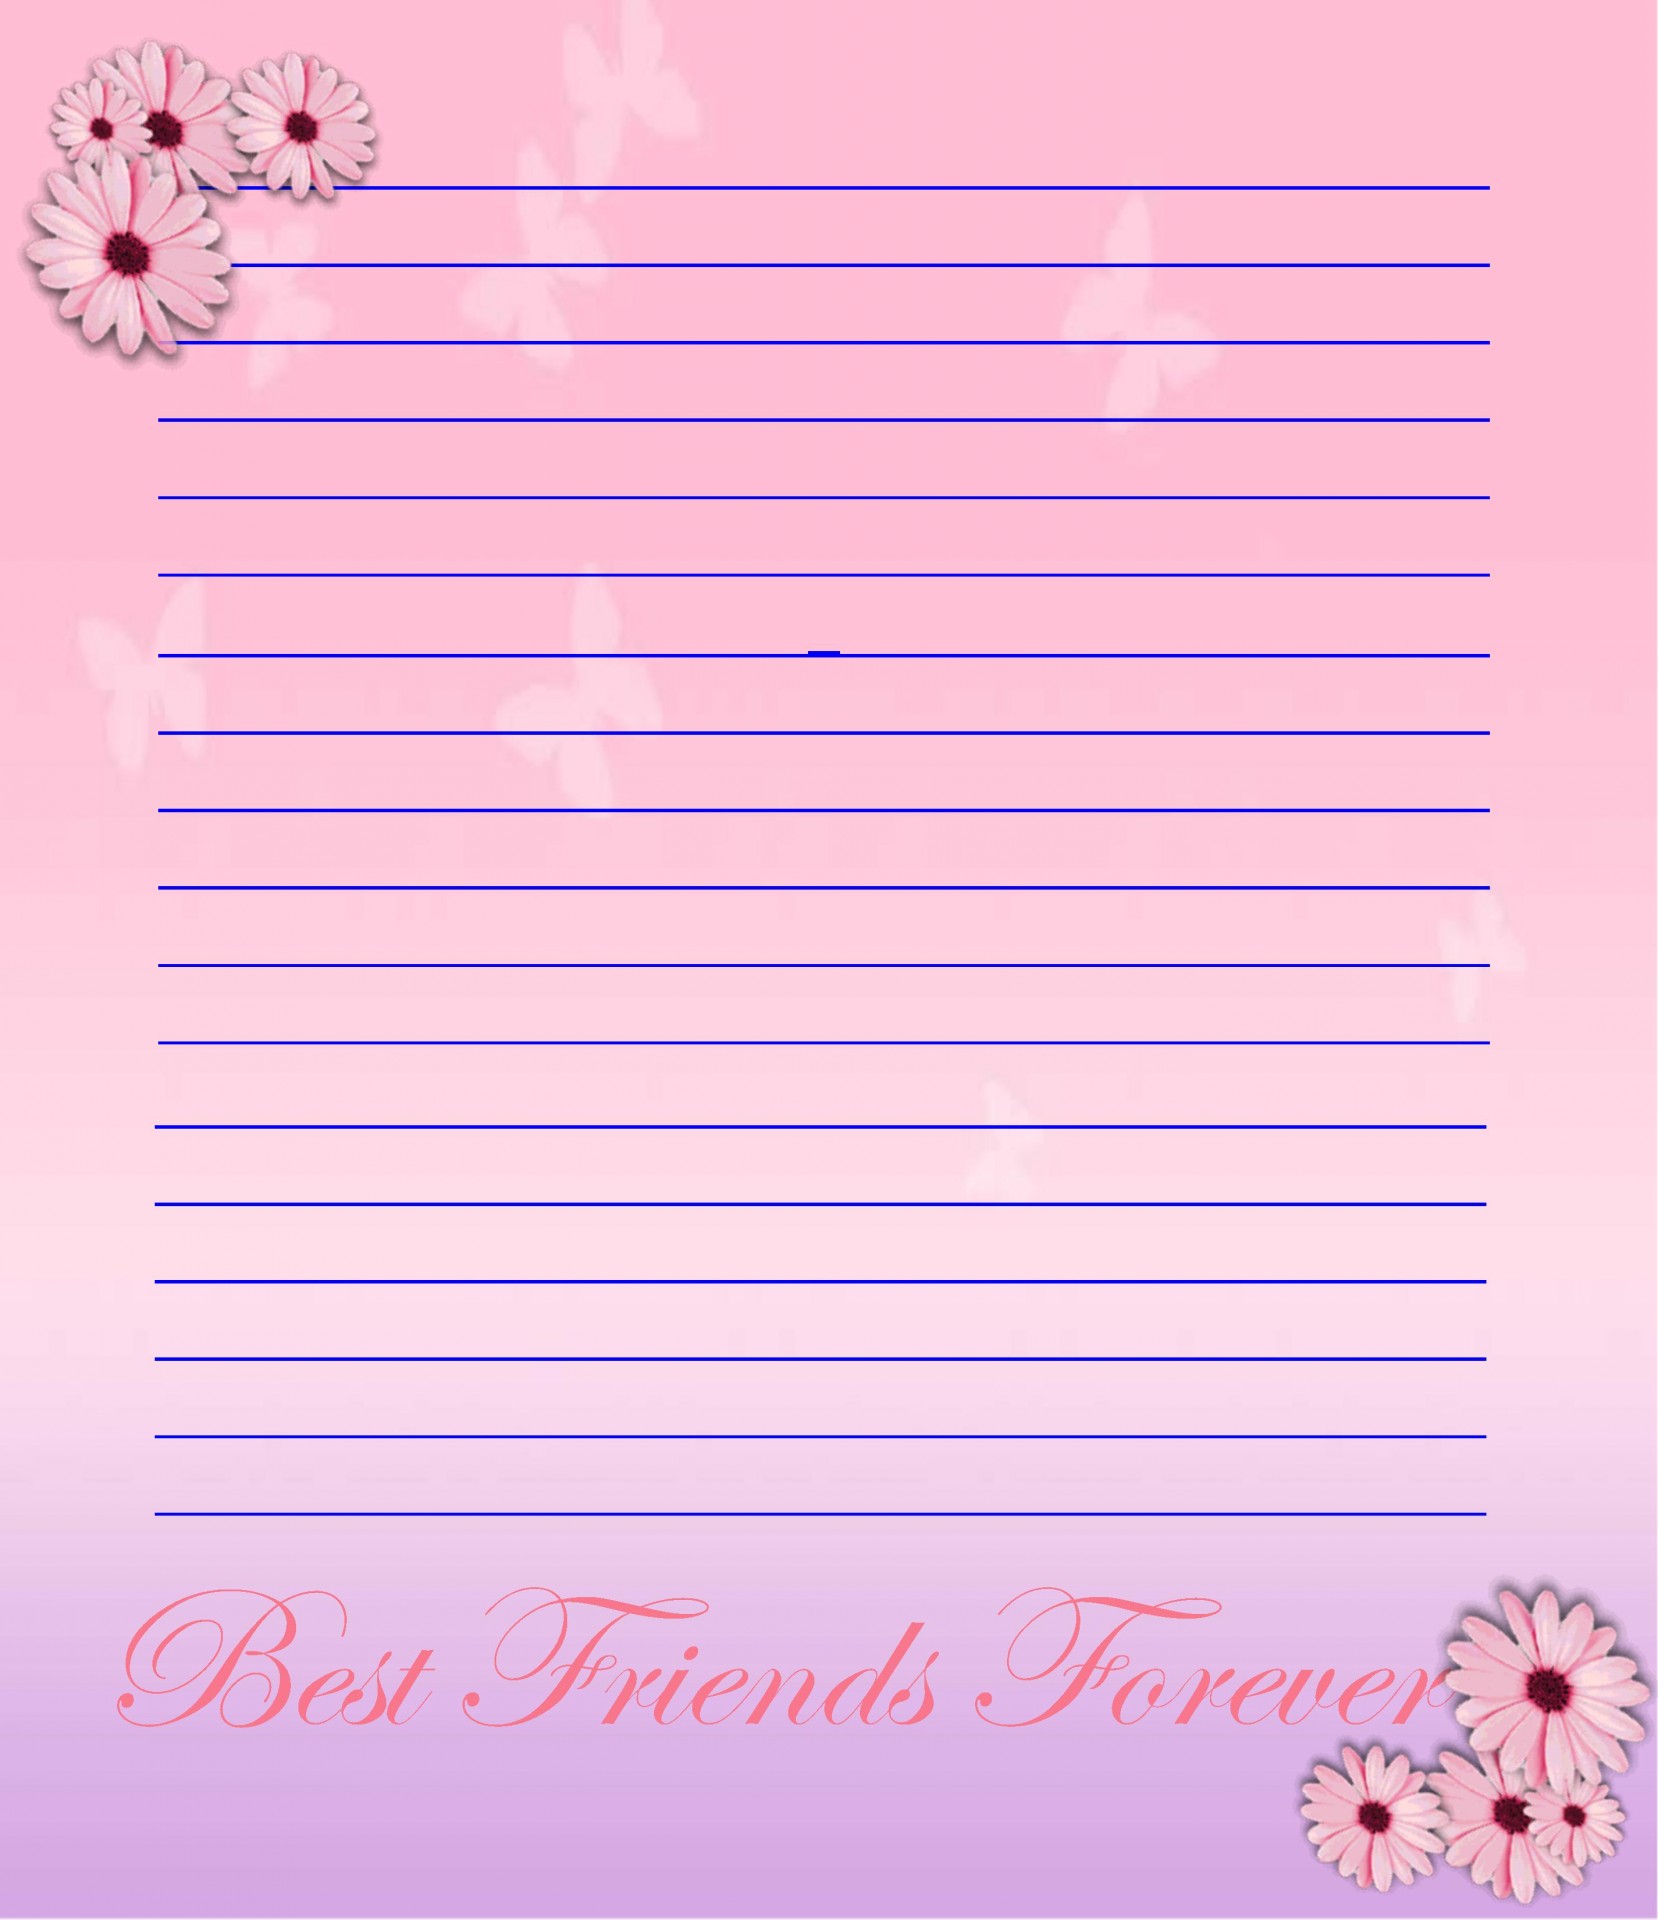 stationery paper arts letter paper free photo